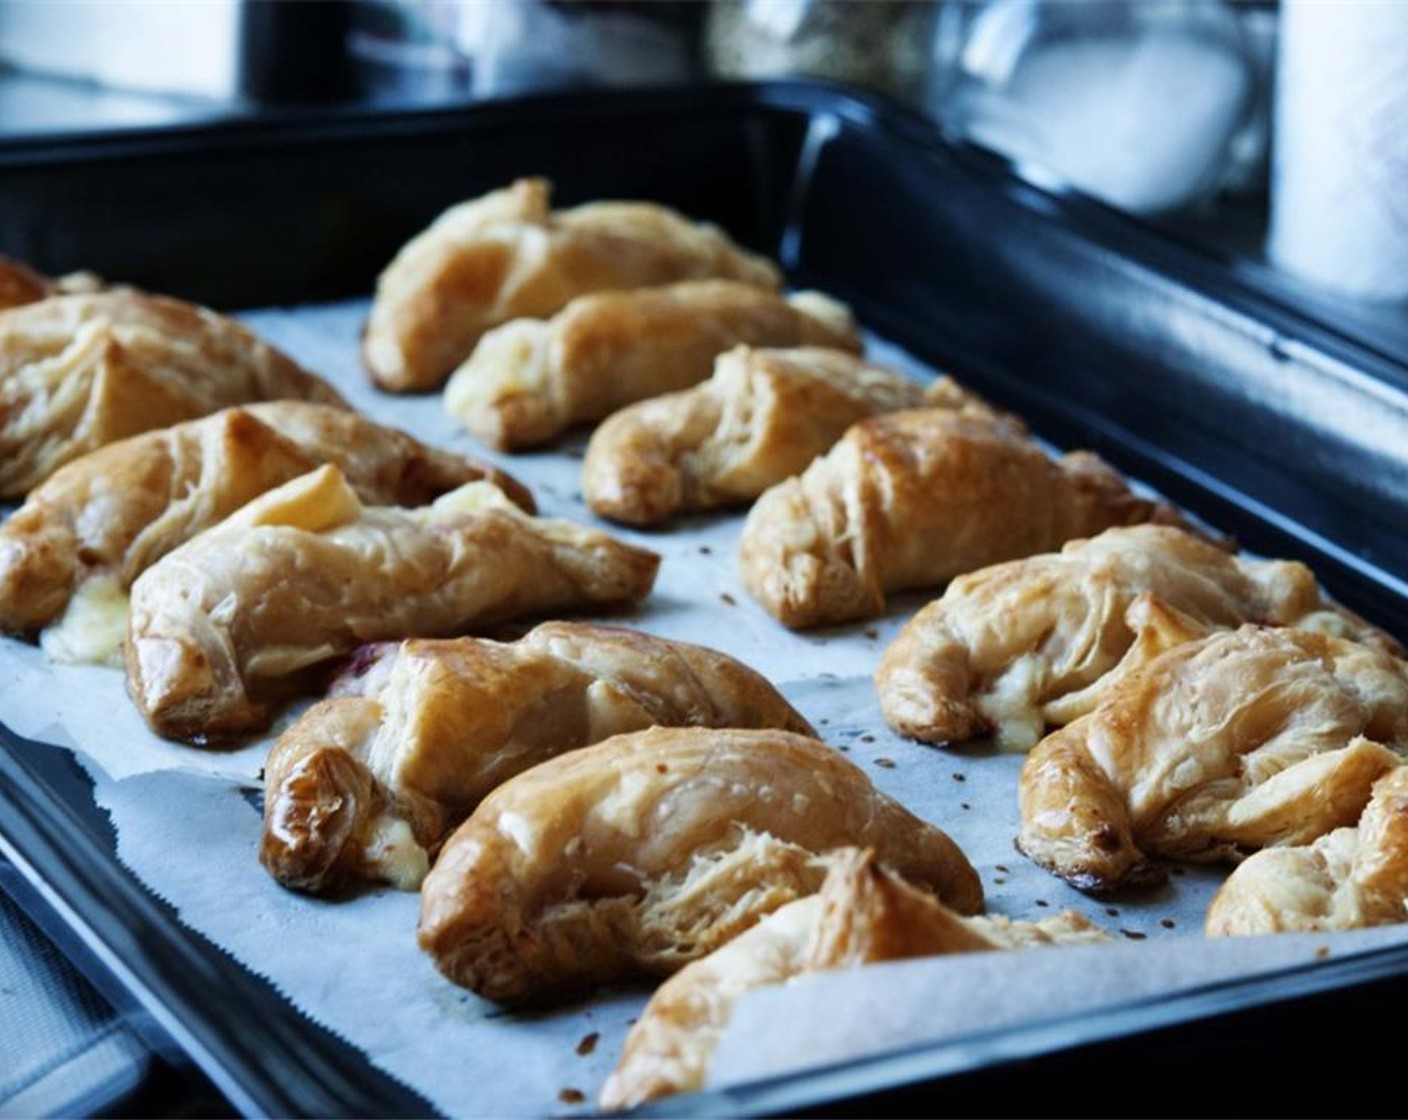 step 8 Bake at 200 degrees C (400 degrees F) for about 15-20 minutes, or until they get a nice golden-brown color. Remove from the oven and let them cool down a bit. These are best served warm (not hot), but even cold-ish they will rock your boat! Enjoy!